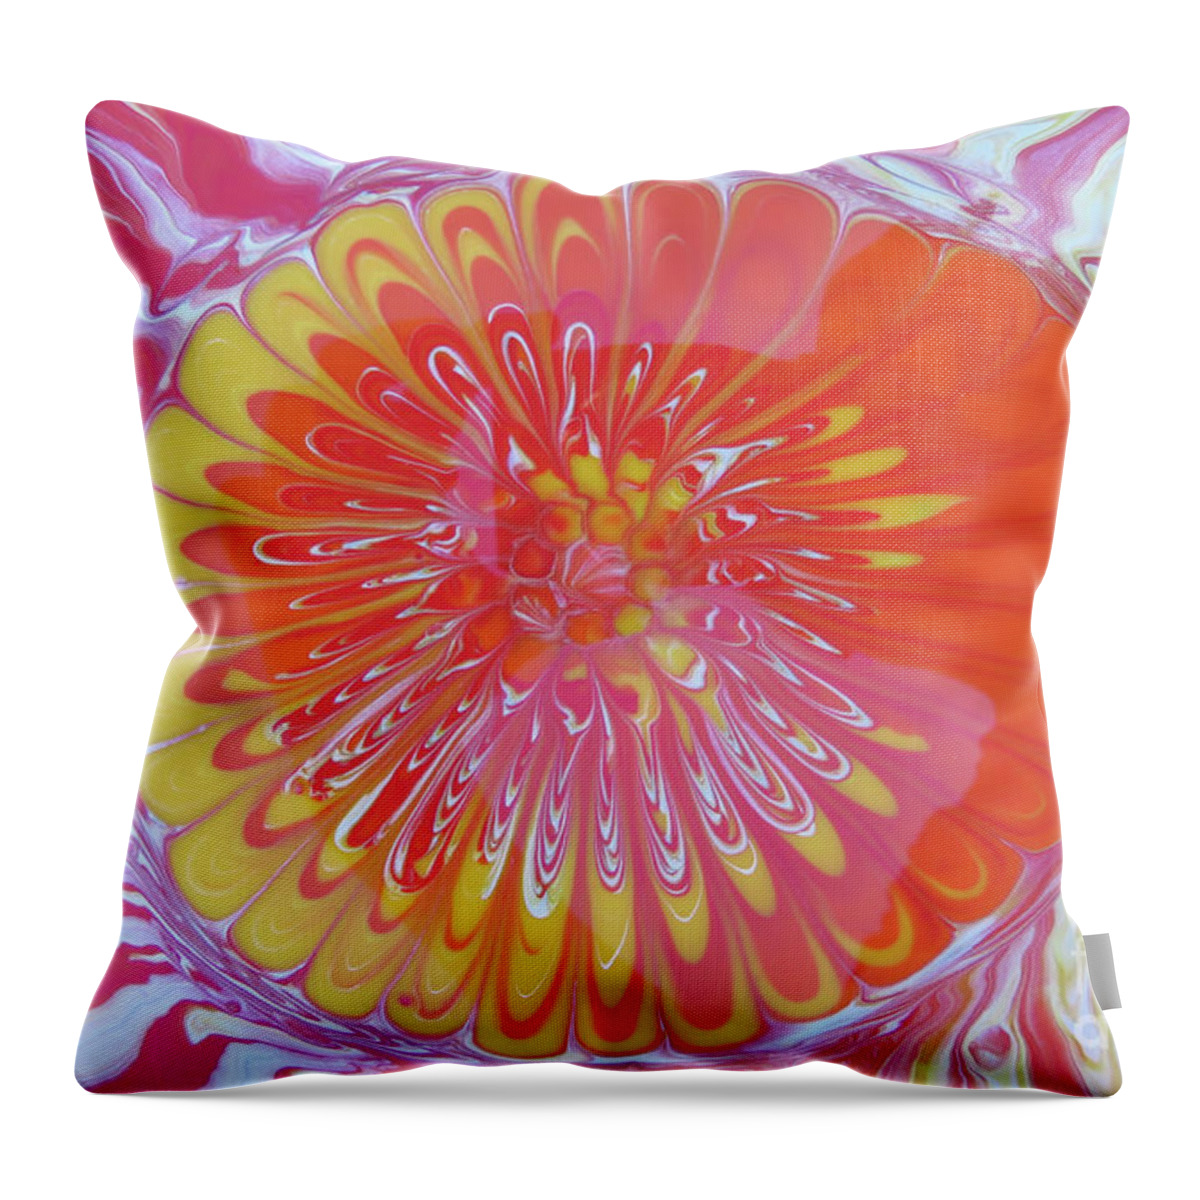 Acrylic Pour Throw Pillow featuring the painting Acrylic Pour Desert Sun by Elisabeth Lucas